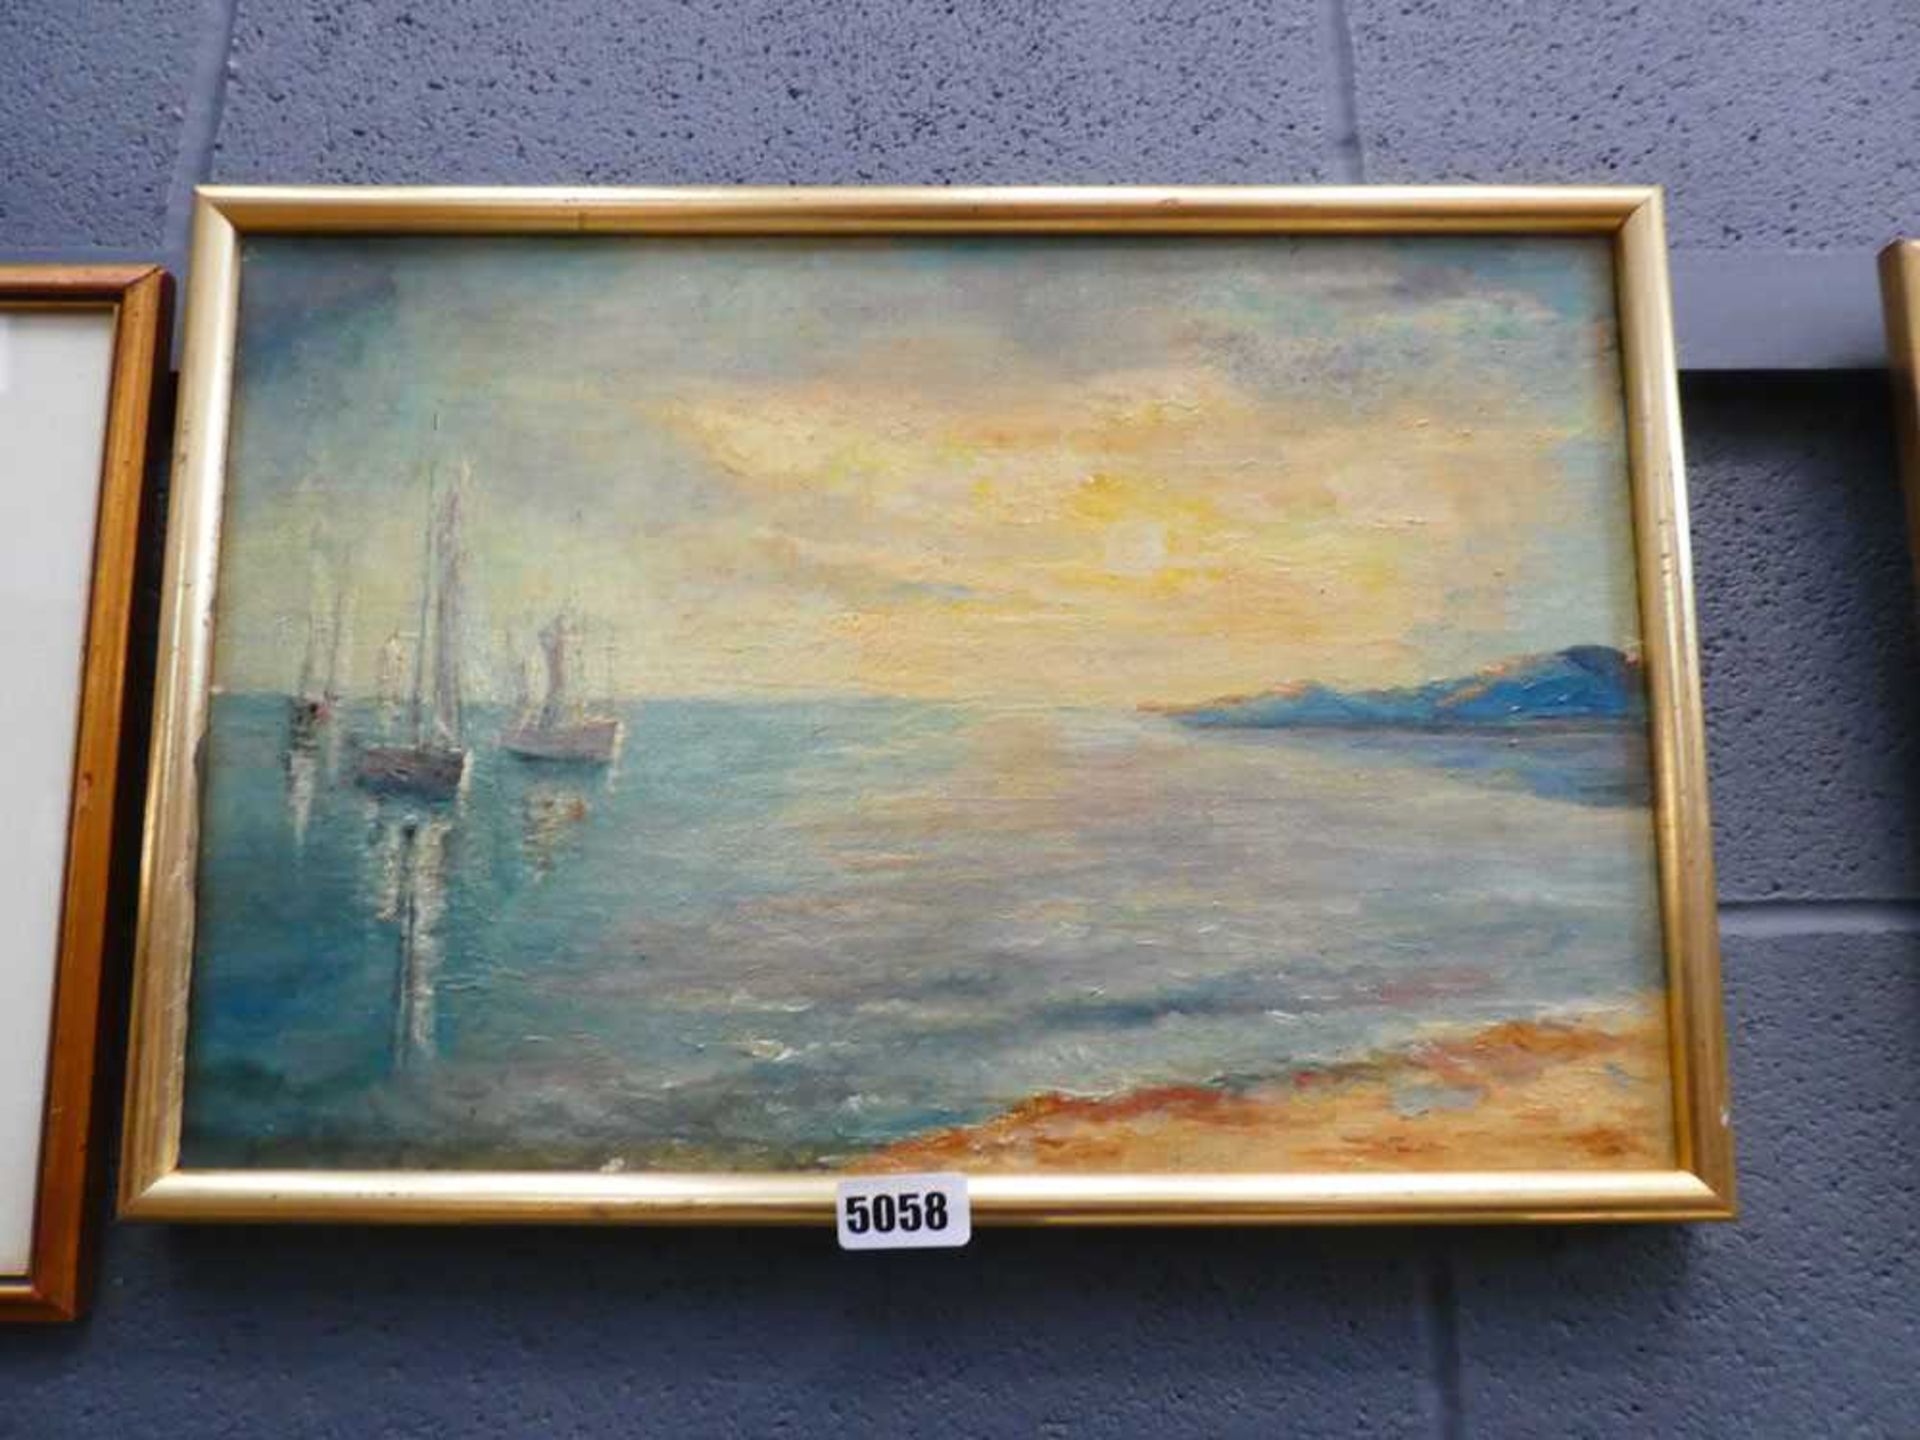 Oil on canvas - coastal scene with anchored sailing boats